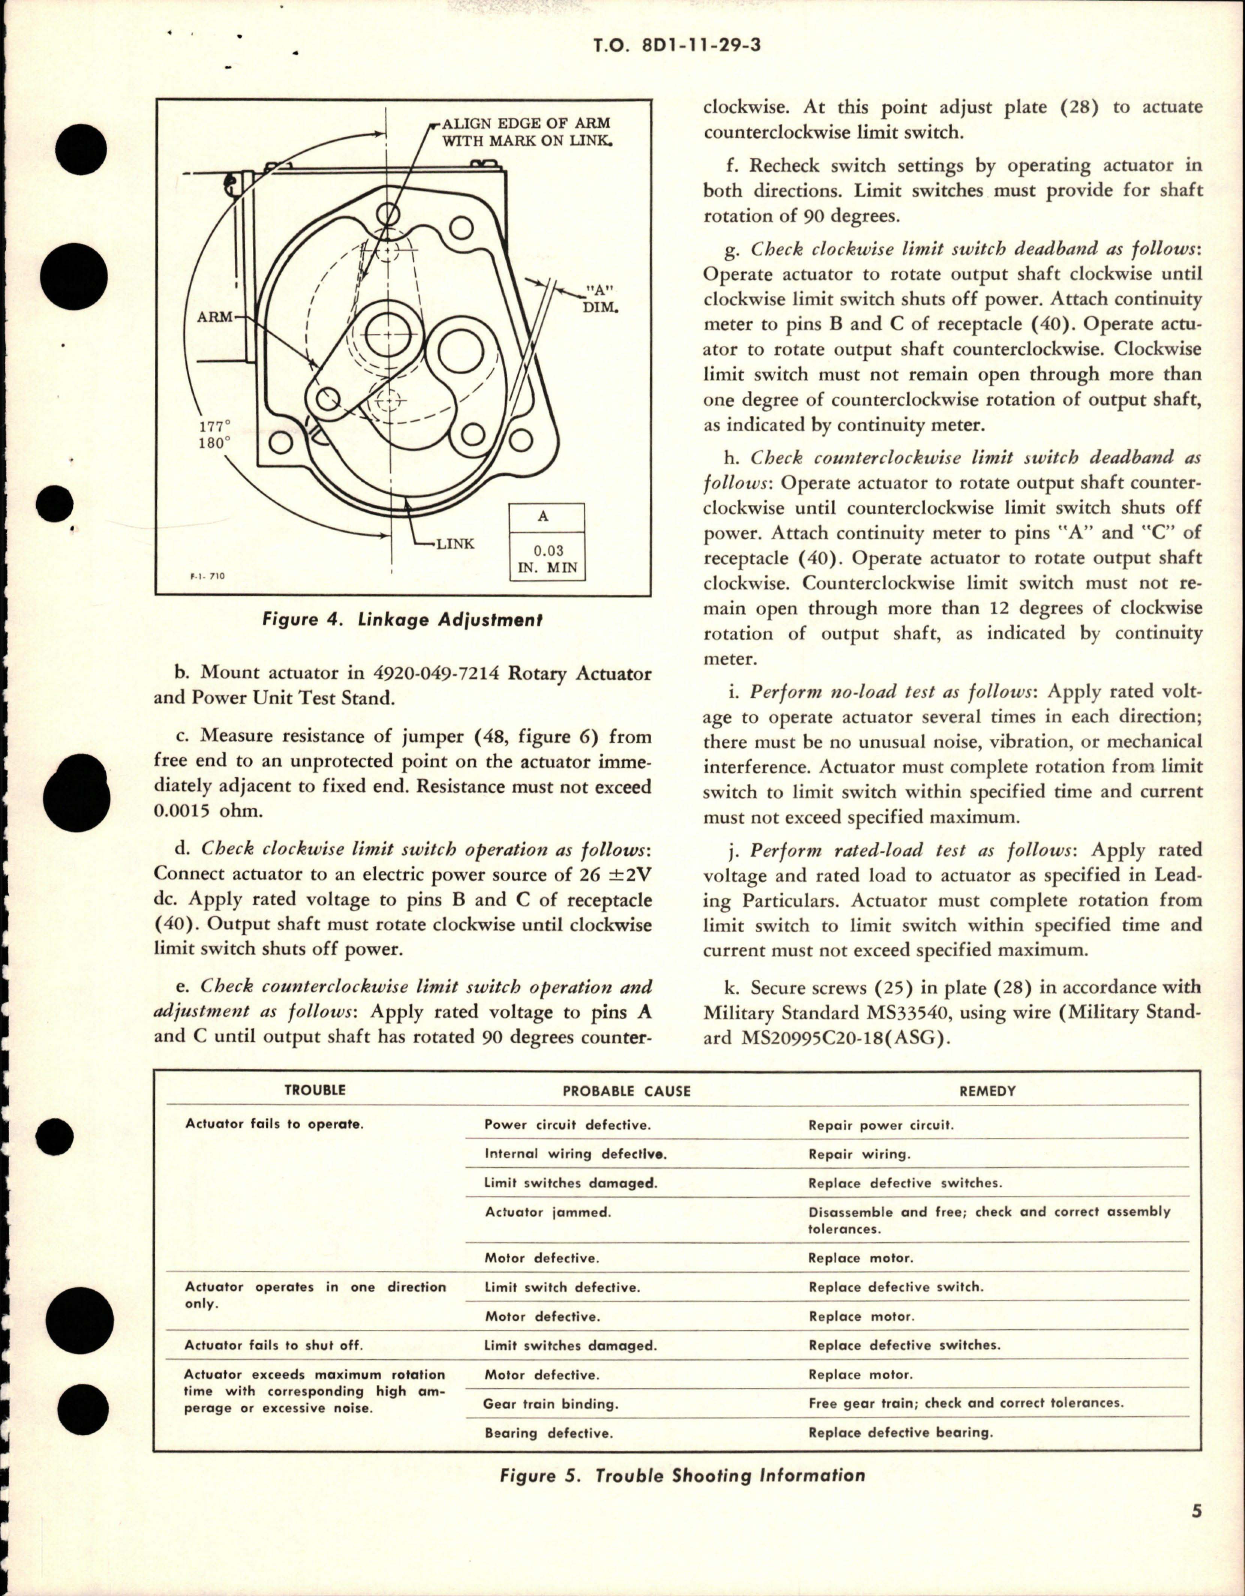 Sample page 5 from AirCorps Library document: Overhaul with Parts Breakdown for Electromechanical Rotary Actuator - Part 34988-5